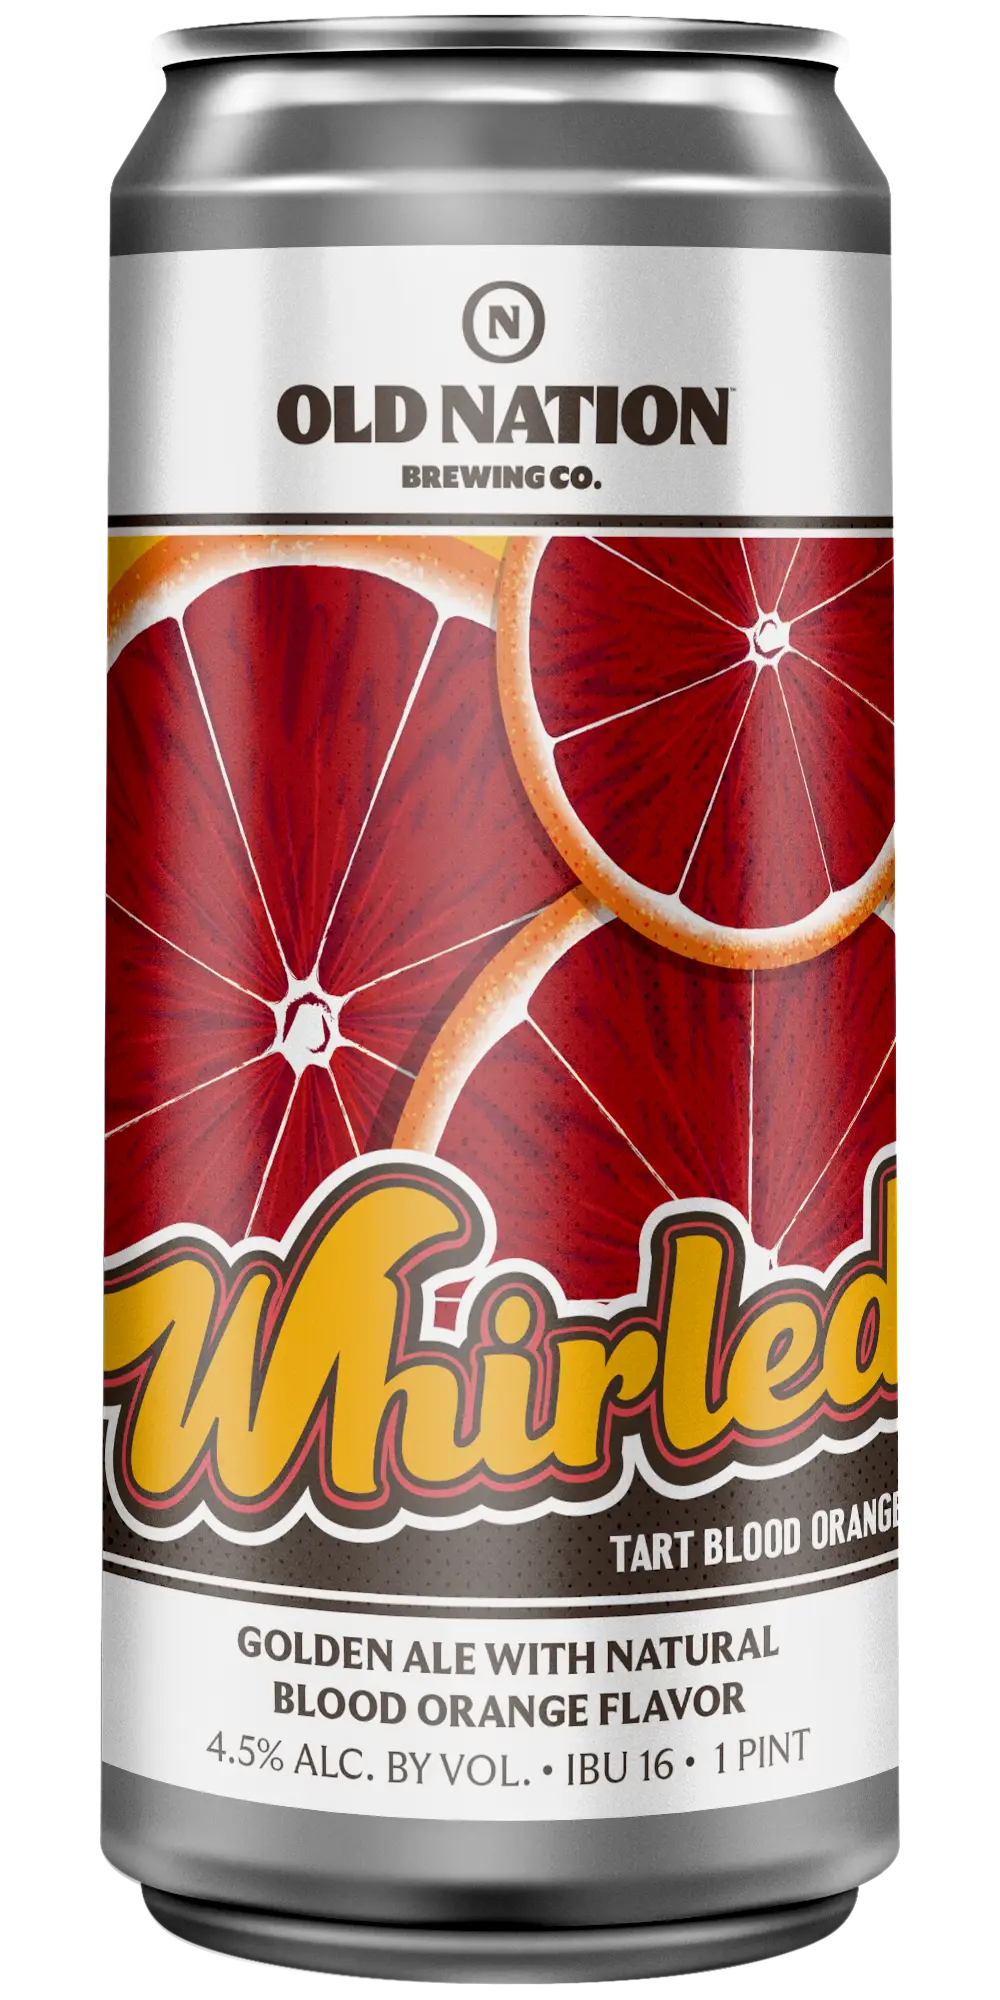 Old Nation Whirled Tart Blood Orange beer in an aluminum can. Drawing of blood orange slices on can label.